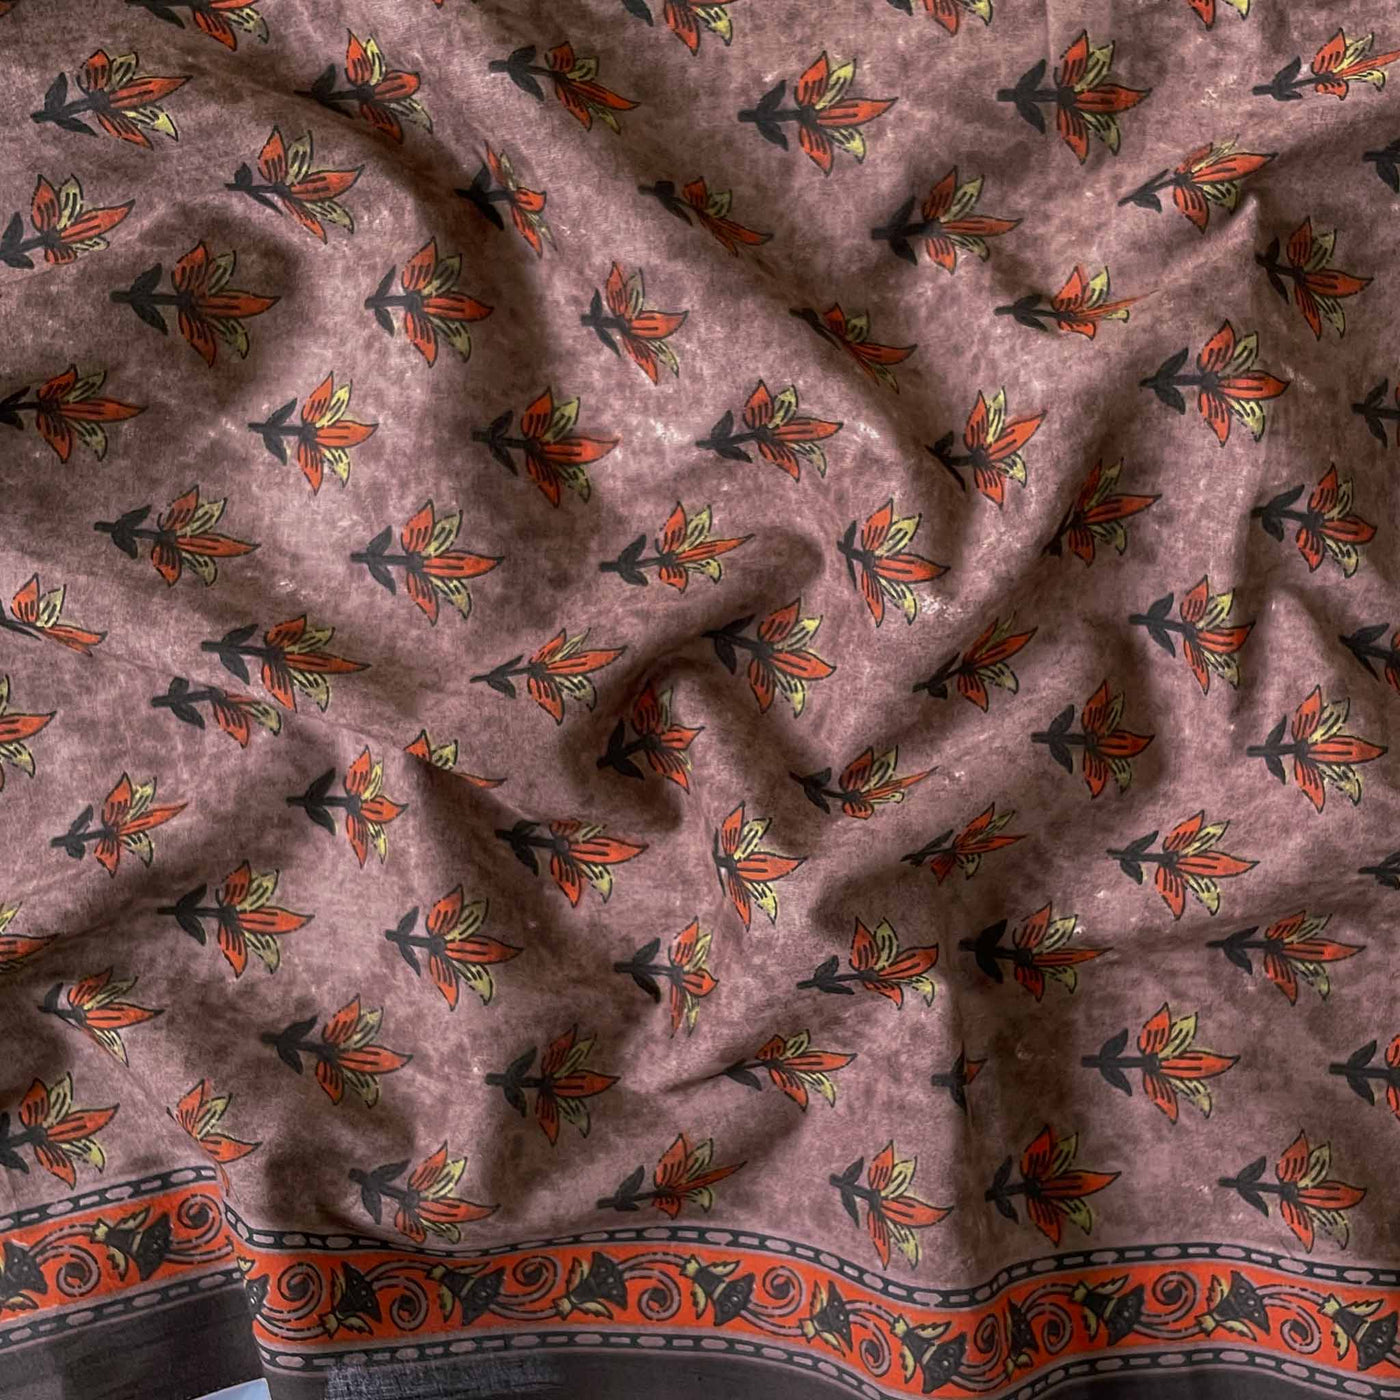 Fabric Pandit Fabric Dusty Mauve The Autum Flora Hand Block Printed Pure Cotton Fabirc Width (43 inches)